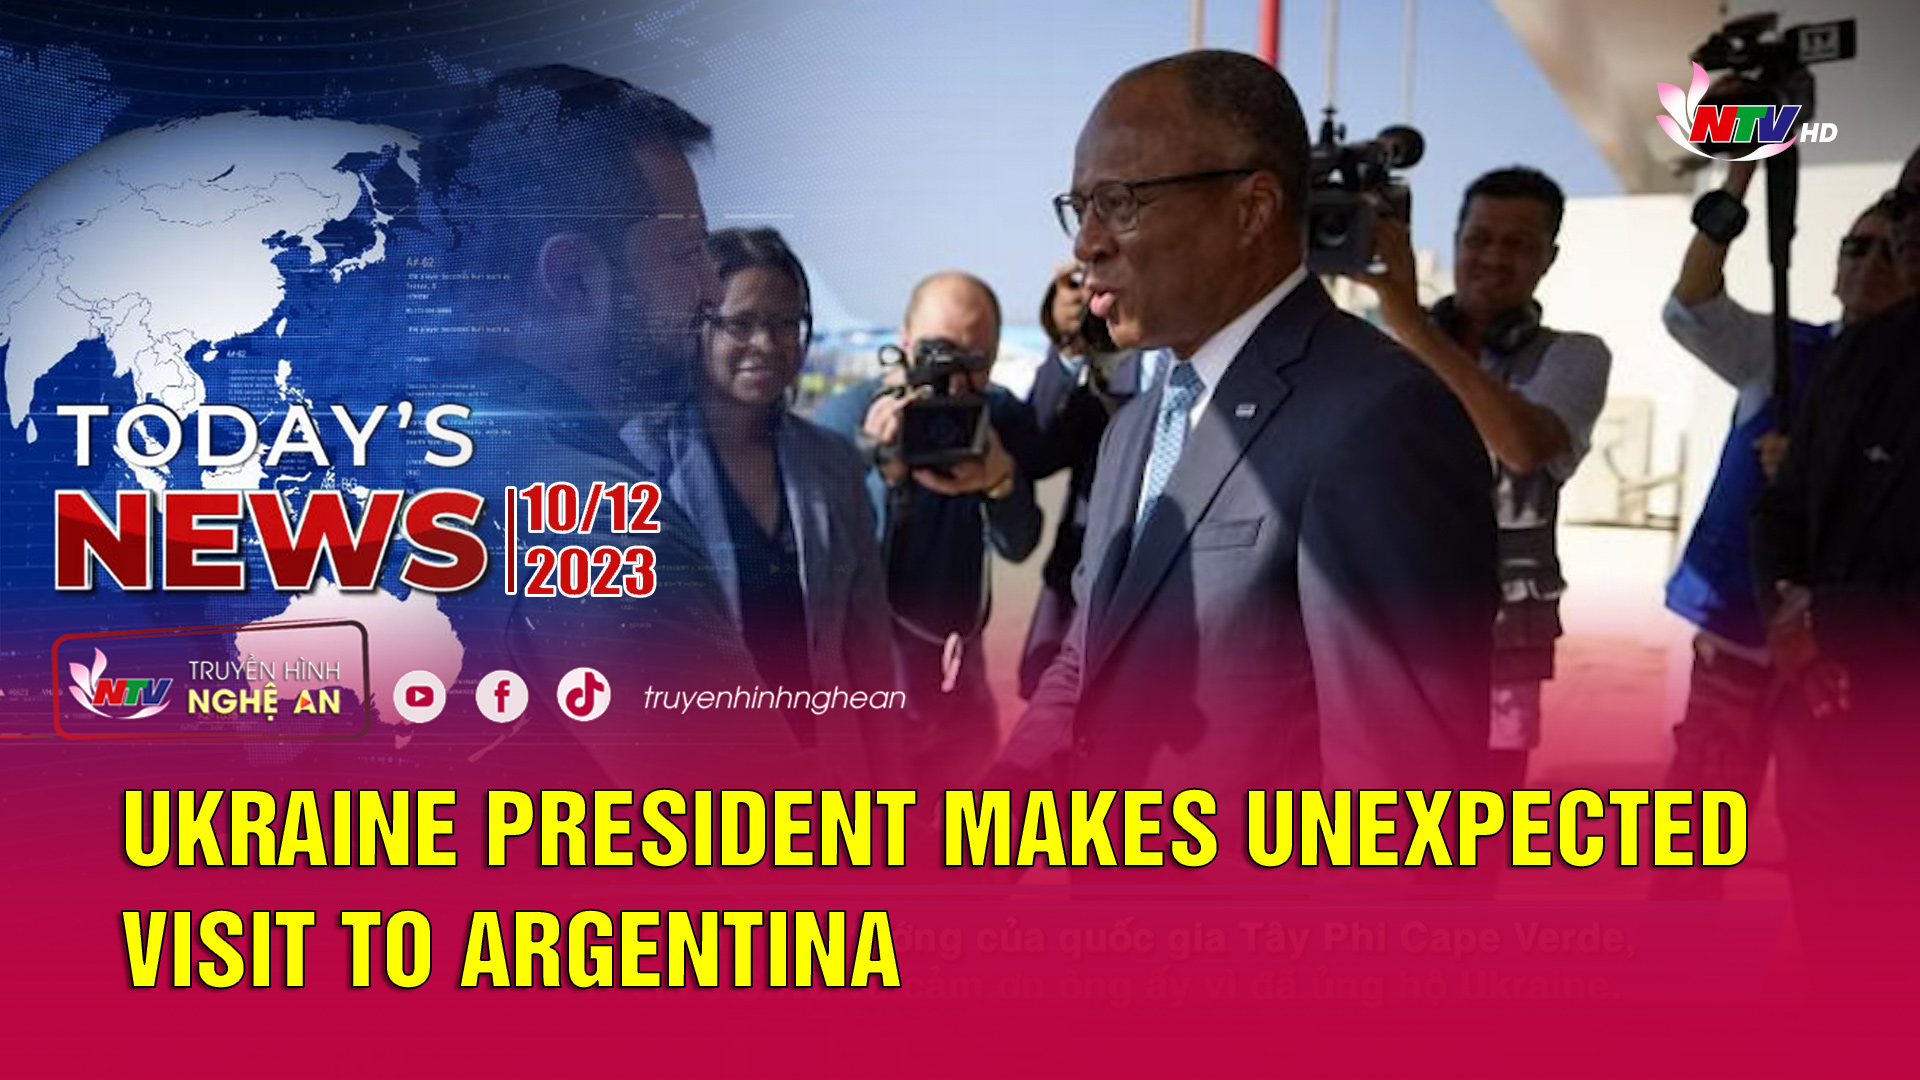 Today's News - 10/12/2023: Ukraine President makes unexpected visit to Argentina